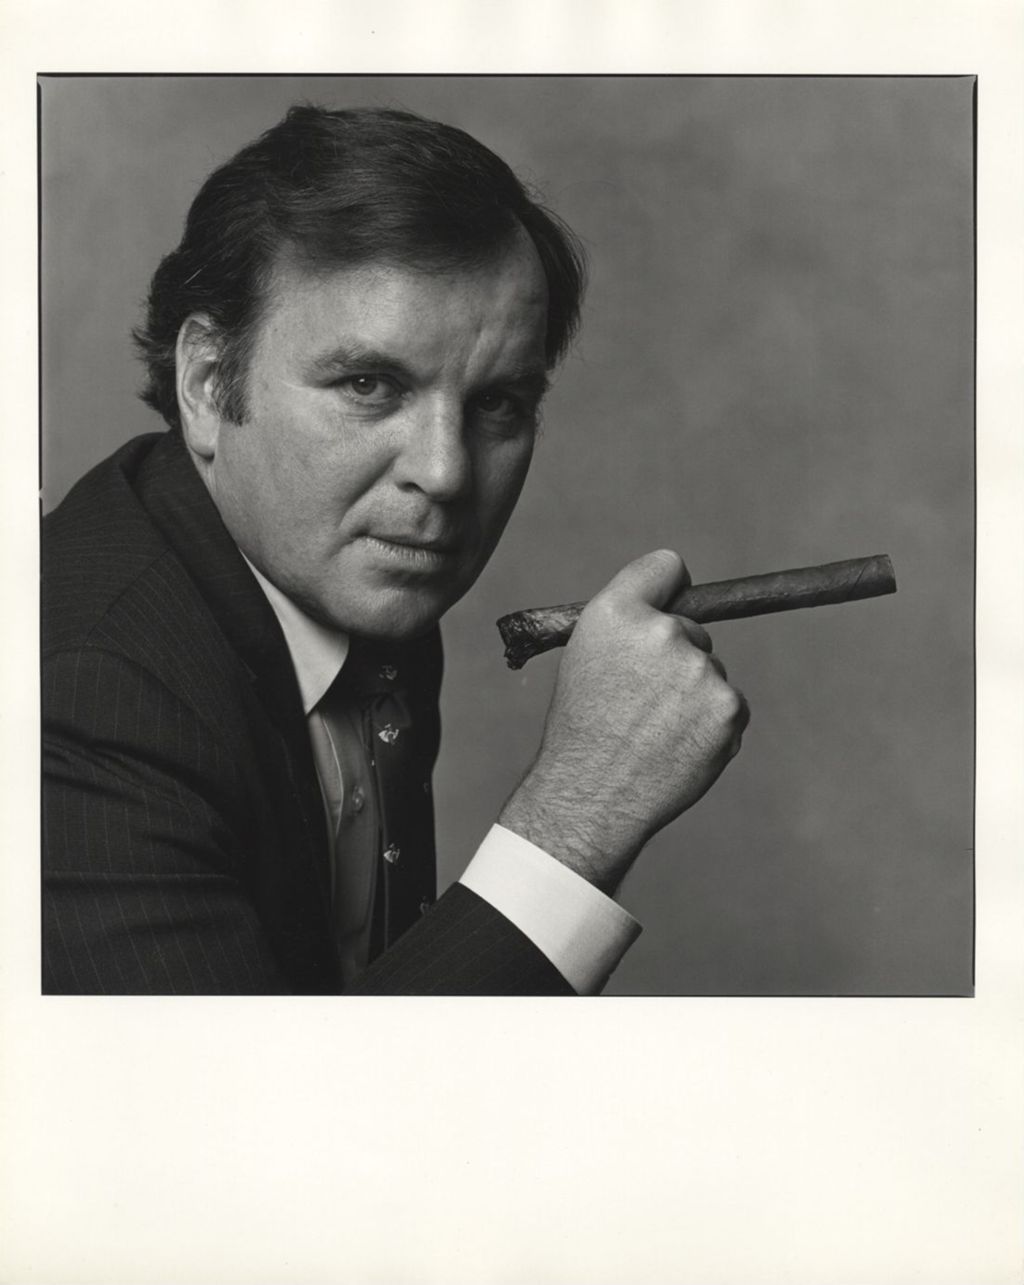 Miniature of Richard M. Daley after winning mayoral election